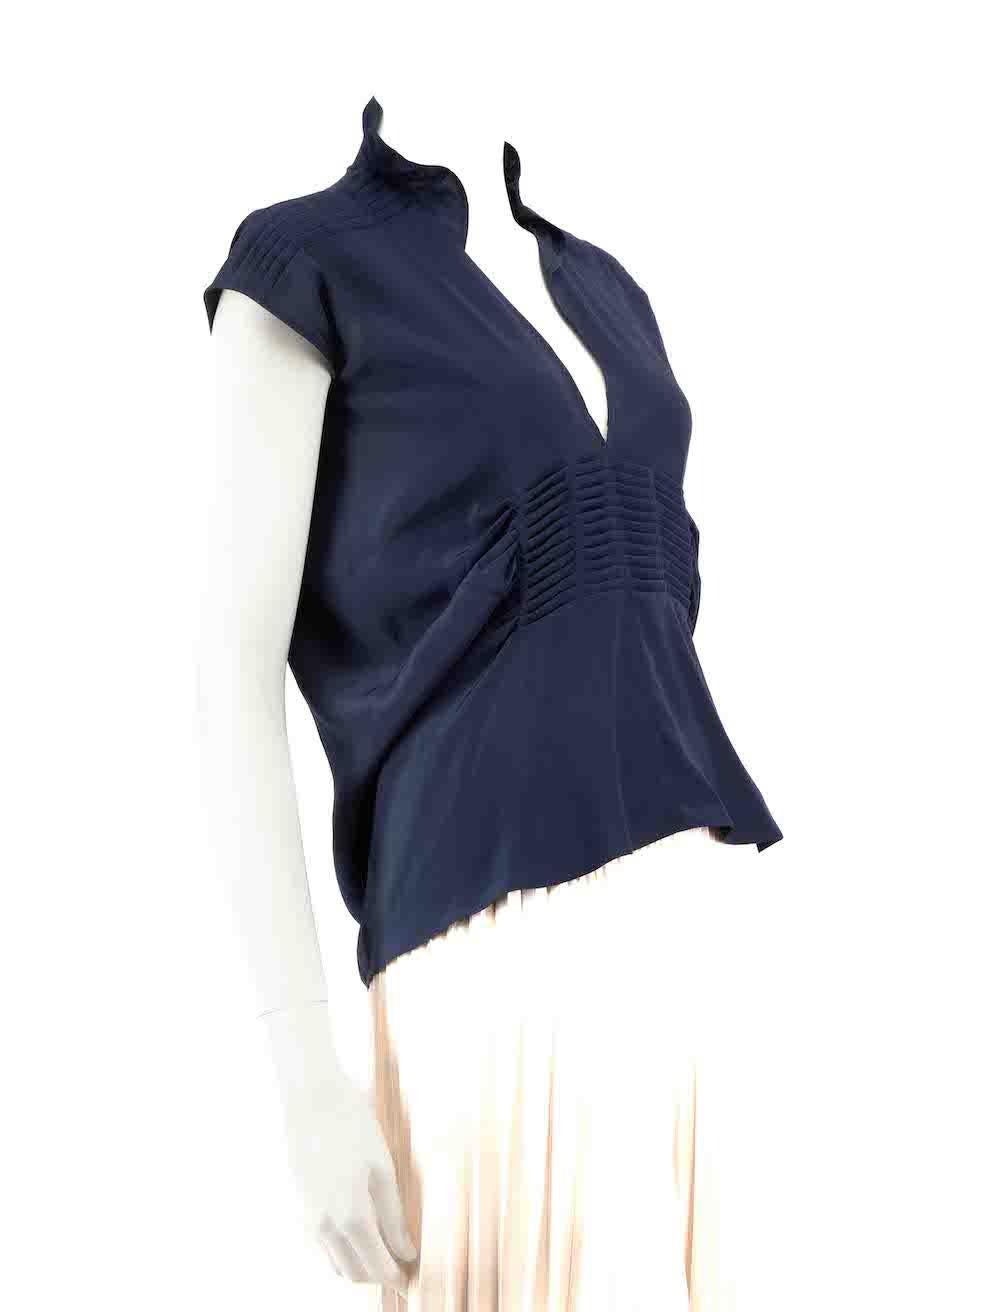 CONDITION is Good. Minor wear to blouse is evident. Light wear to the front and both underarm linings with light marks on this used Saint Laurent designer resale item.
 
Details
Navy
Silk
Blouse
Sleeveless
V-neck
Pleated detail
 
Made in